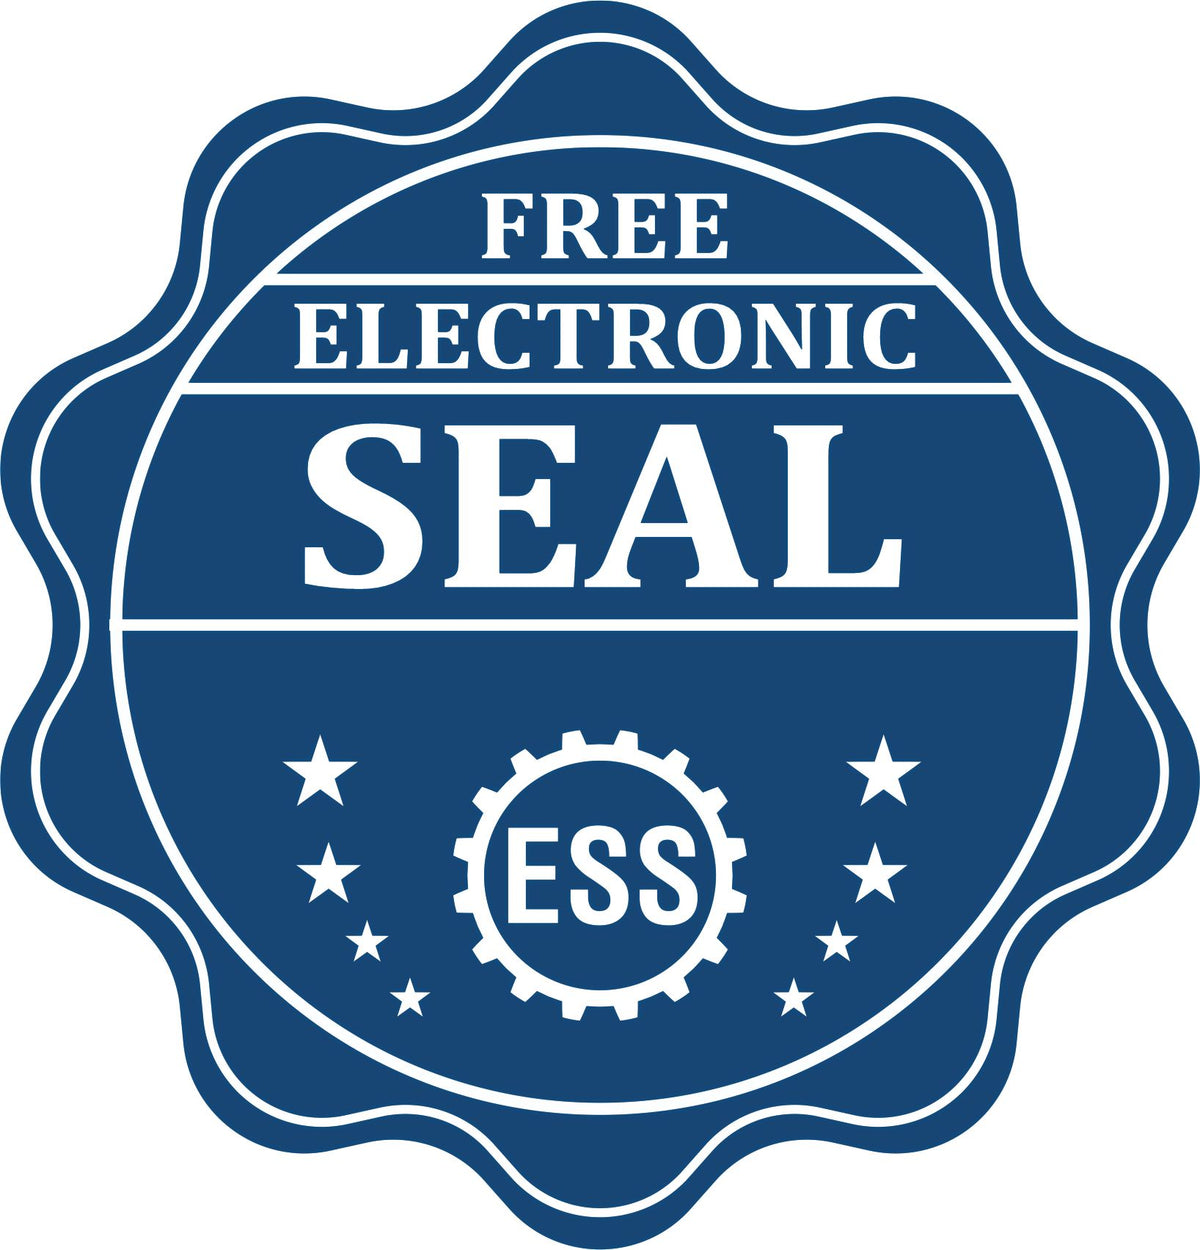 A badge showing a free electronic seal for the Slim Pre-Inked Ohio Professional Geologist Seal Stamp with stars and the ESS gear on the emblem.